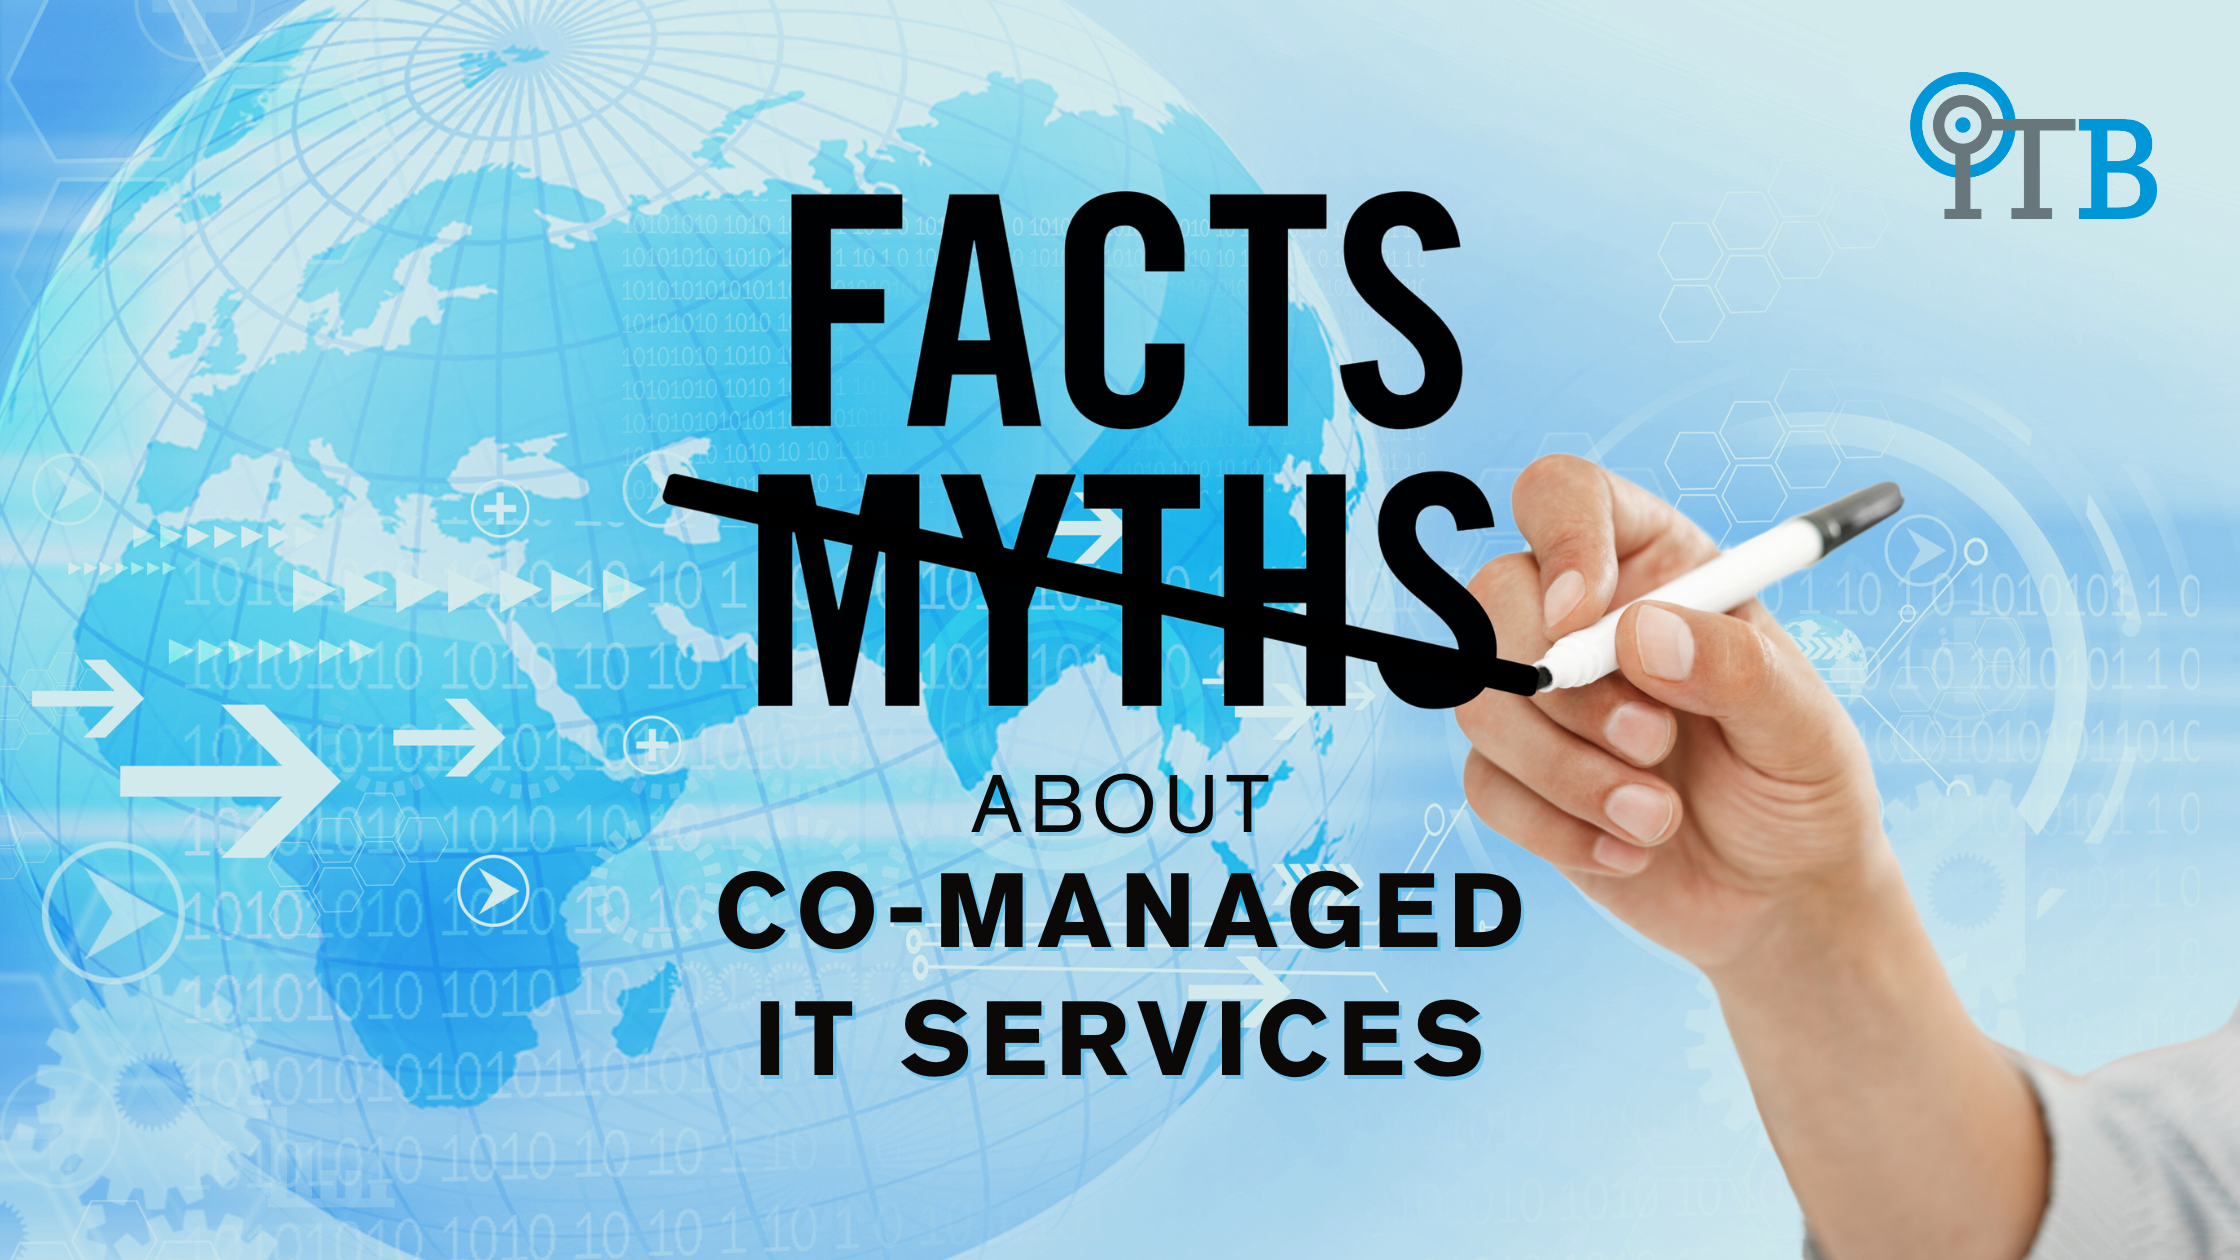 DEBUKING MYTHS ABOUT CO-MANAGED IT SERVICES